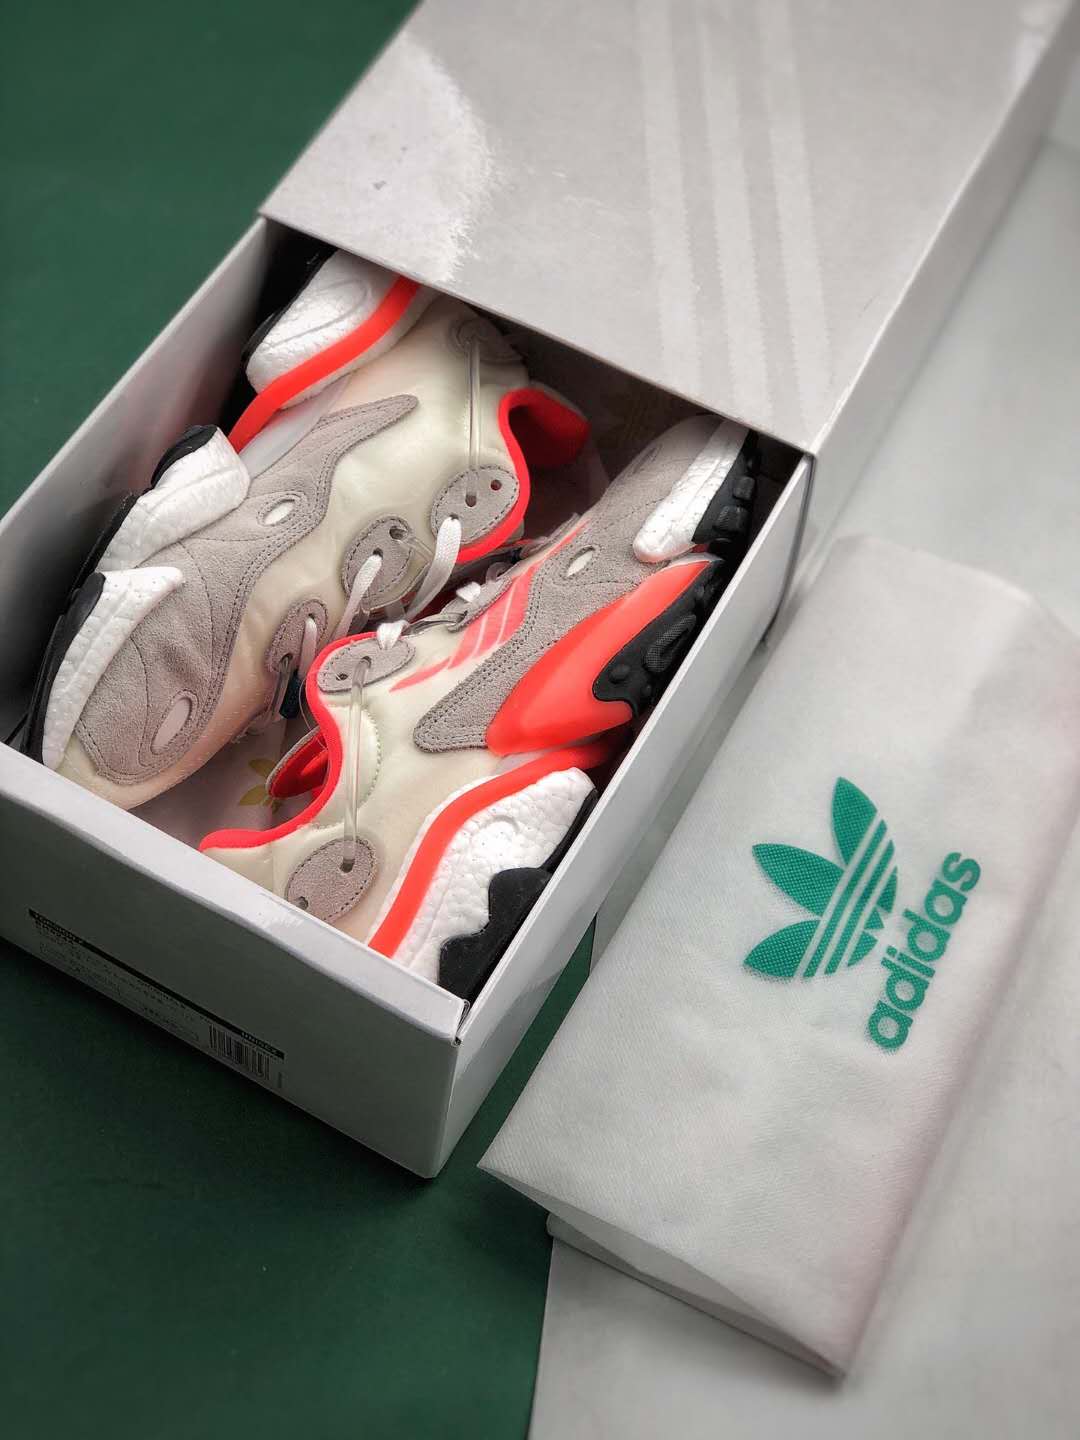 Adidas Torsion X Solar Red EH0244: Stylish and Comfortable Footwear